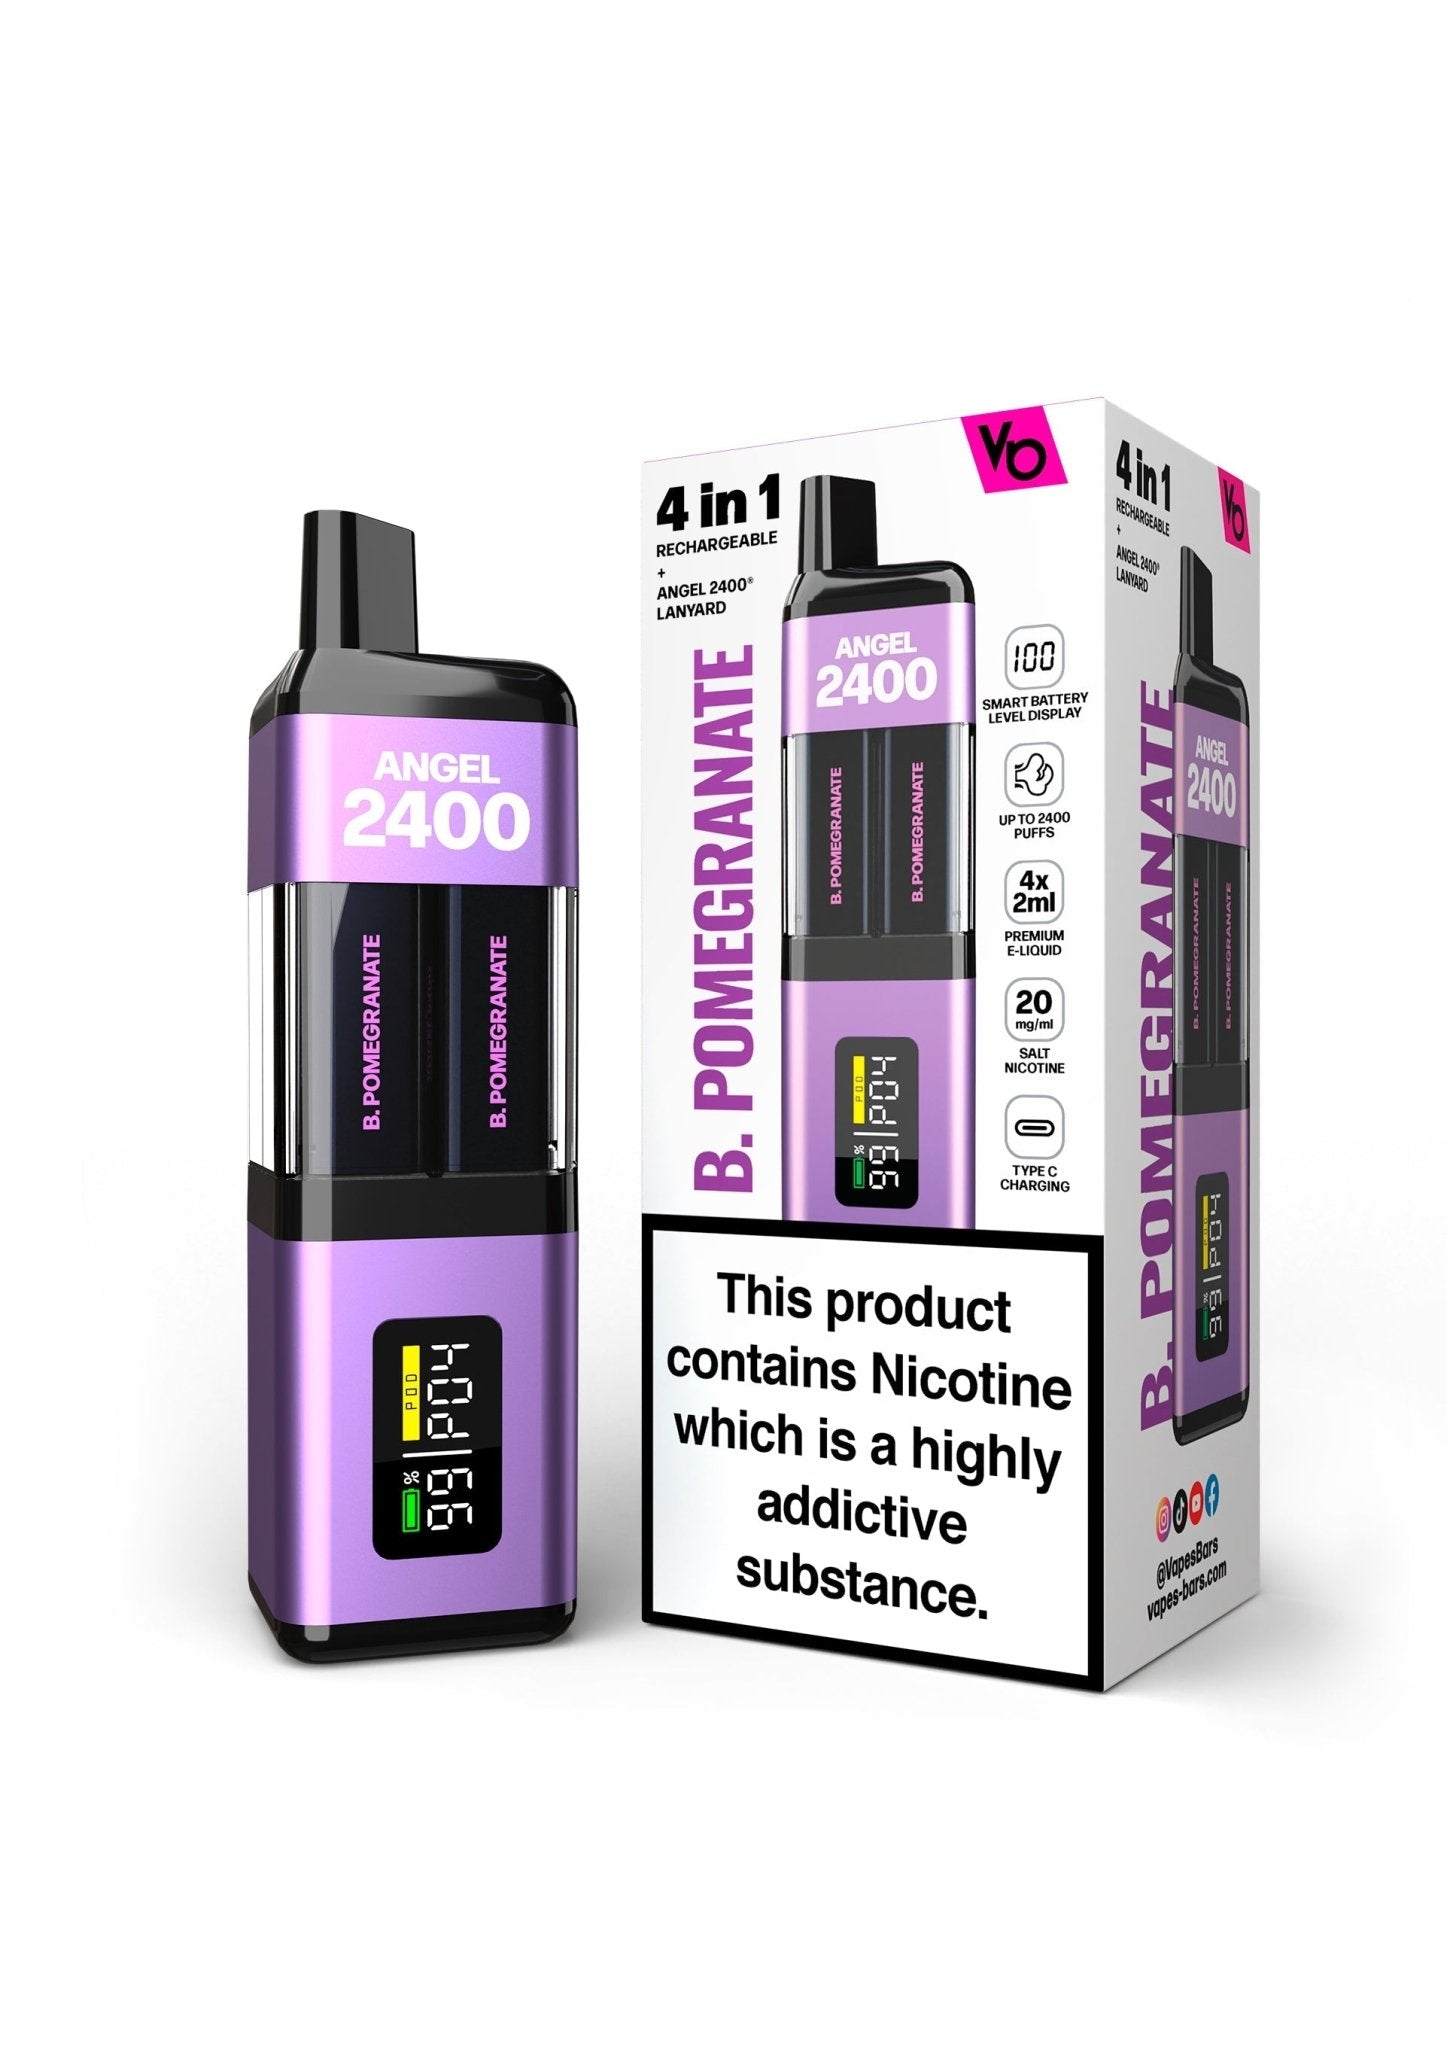 Angel 2400 Puffs Disposble Vape by Vapes Bars - Wolfvapes.co.uk-Blueberry Pomegranate